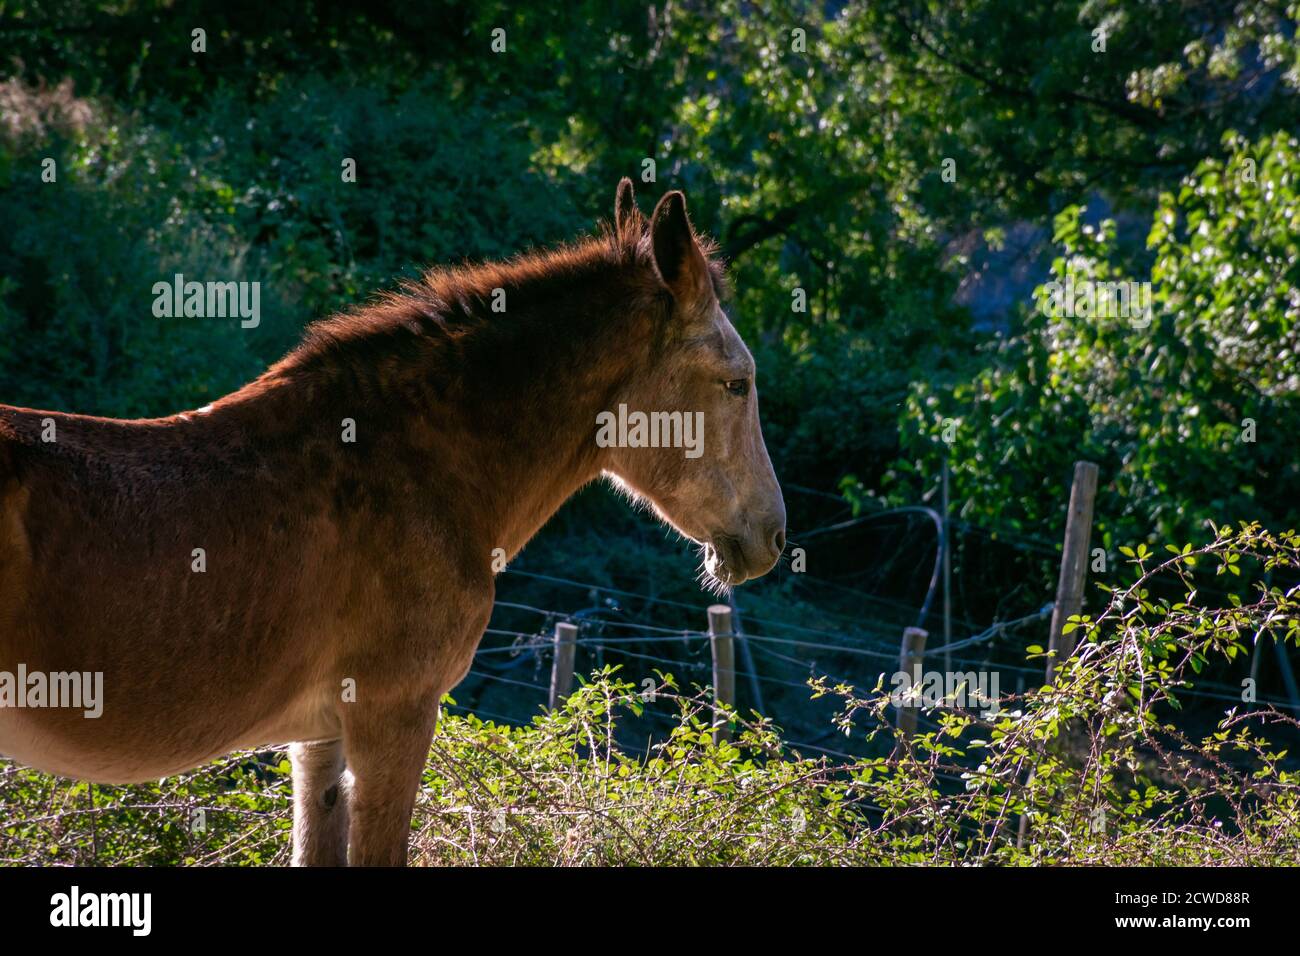 Mule, a mixture of donkey and mare, sterile animal highly appreciated in the countryside for its strength. Stock Photo